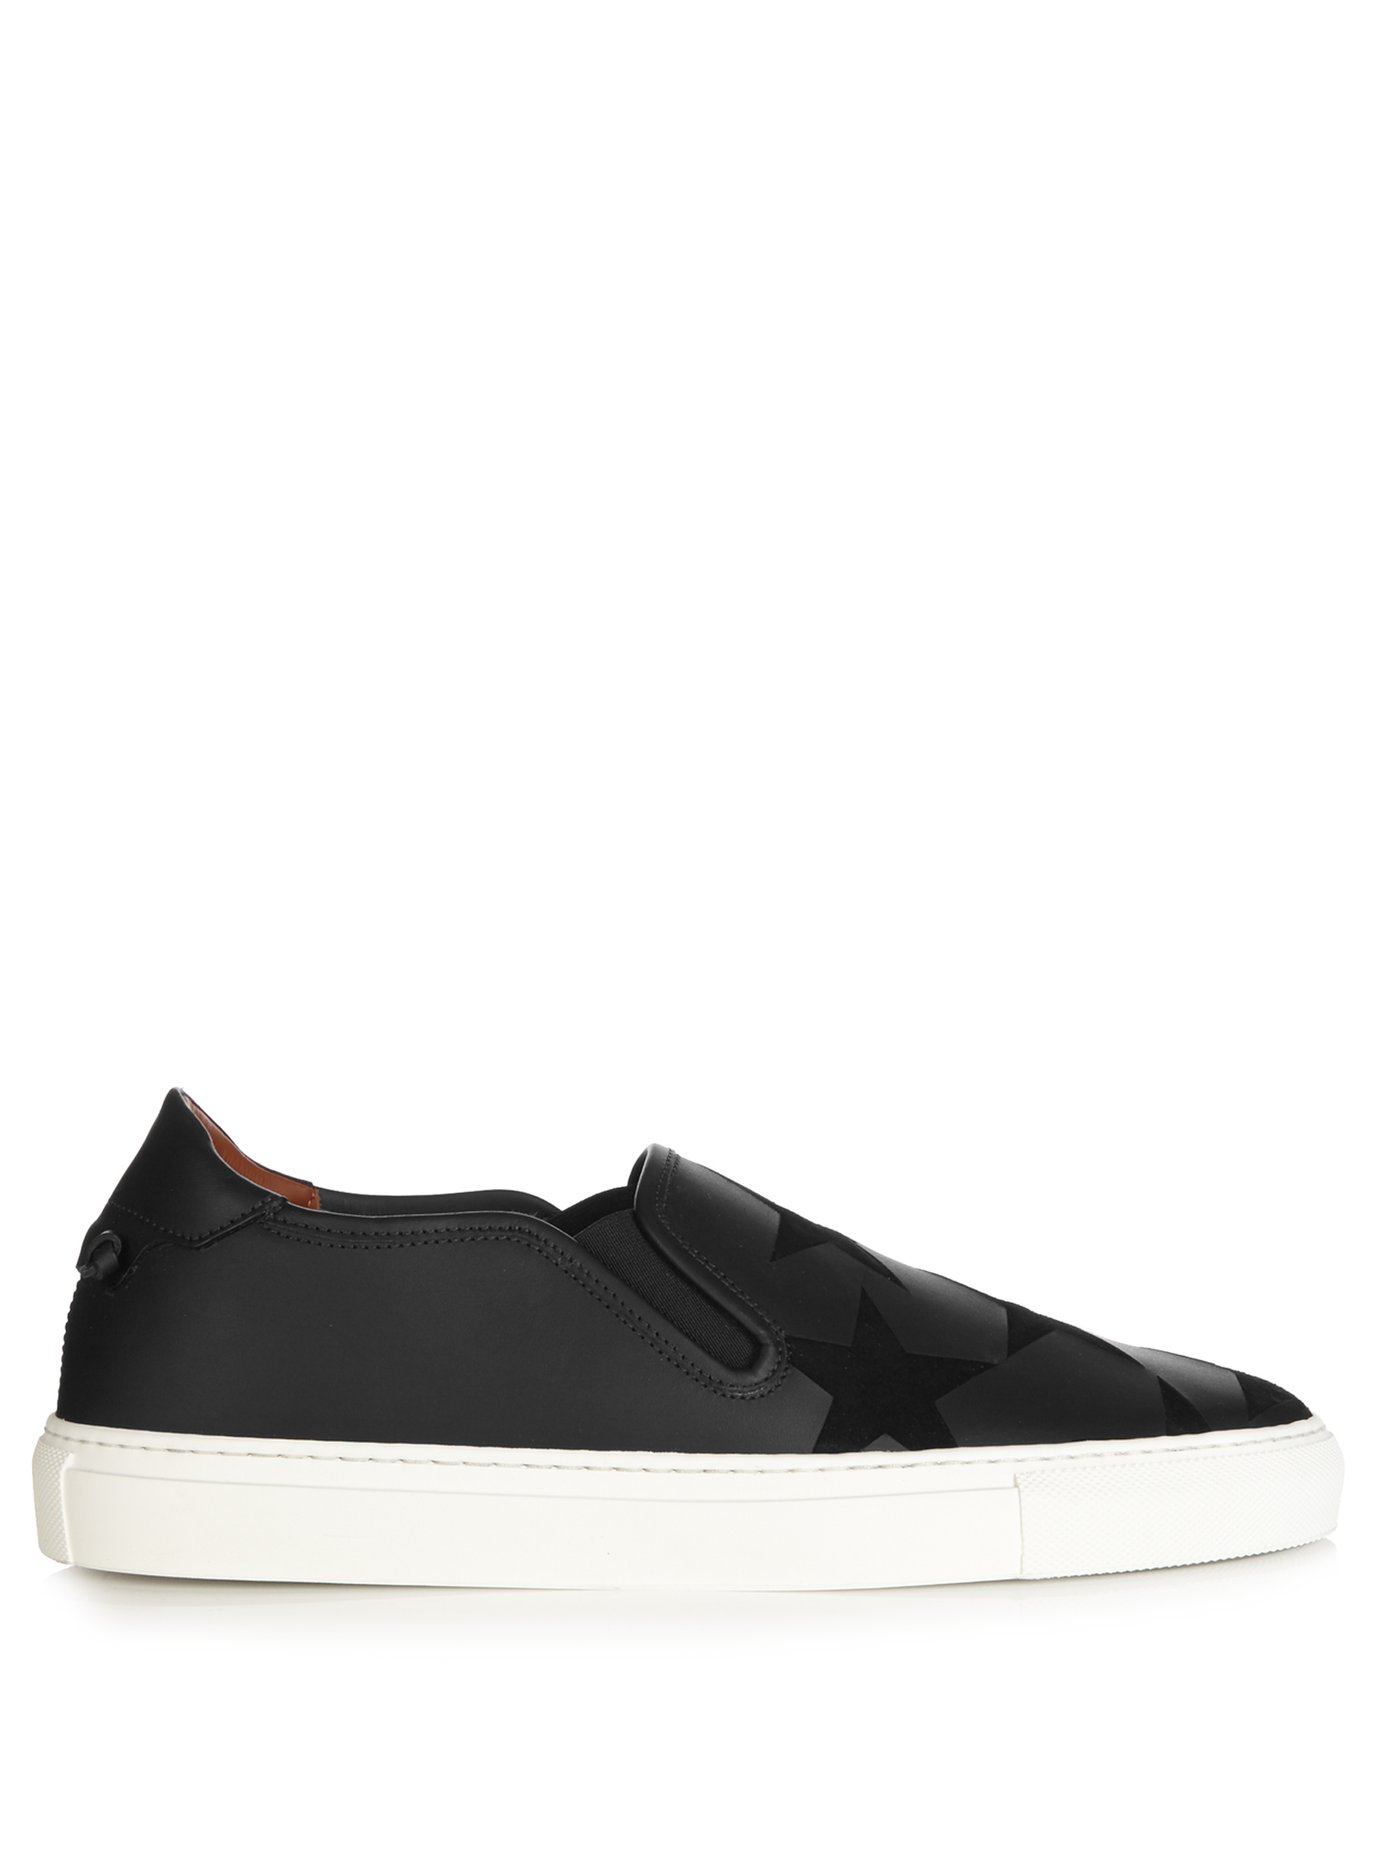 Stars suede and slip-on leather 